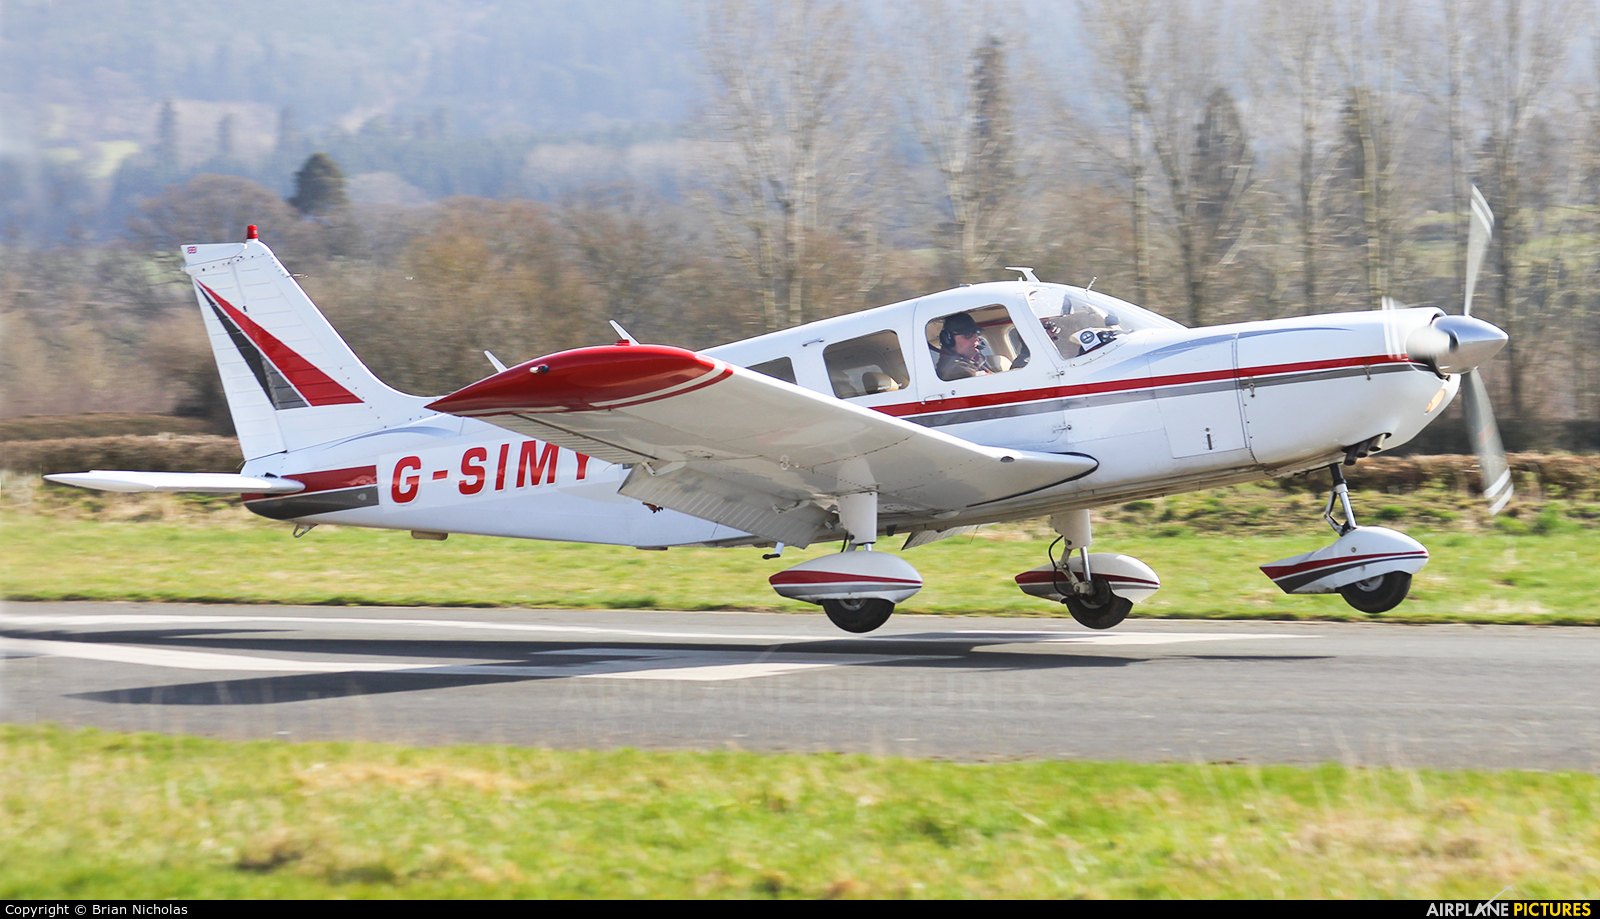 Private G-SIMY aircraft at Welshpool